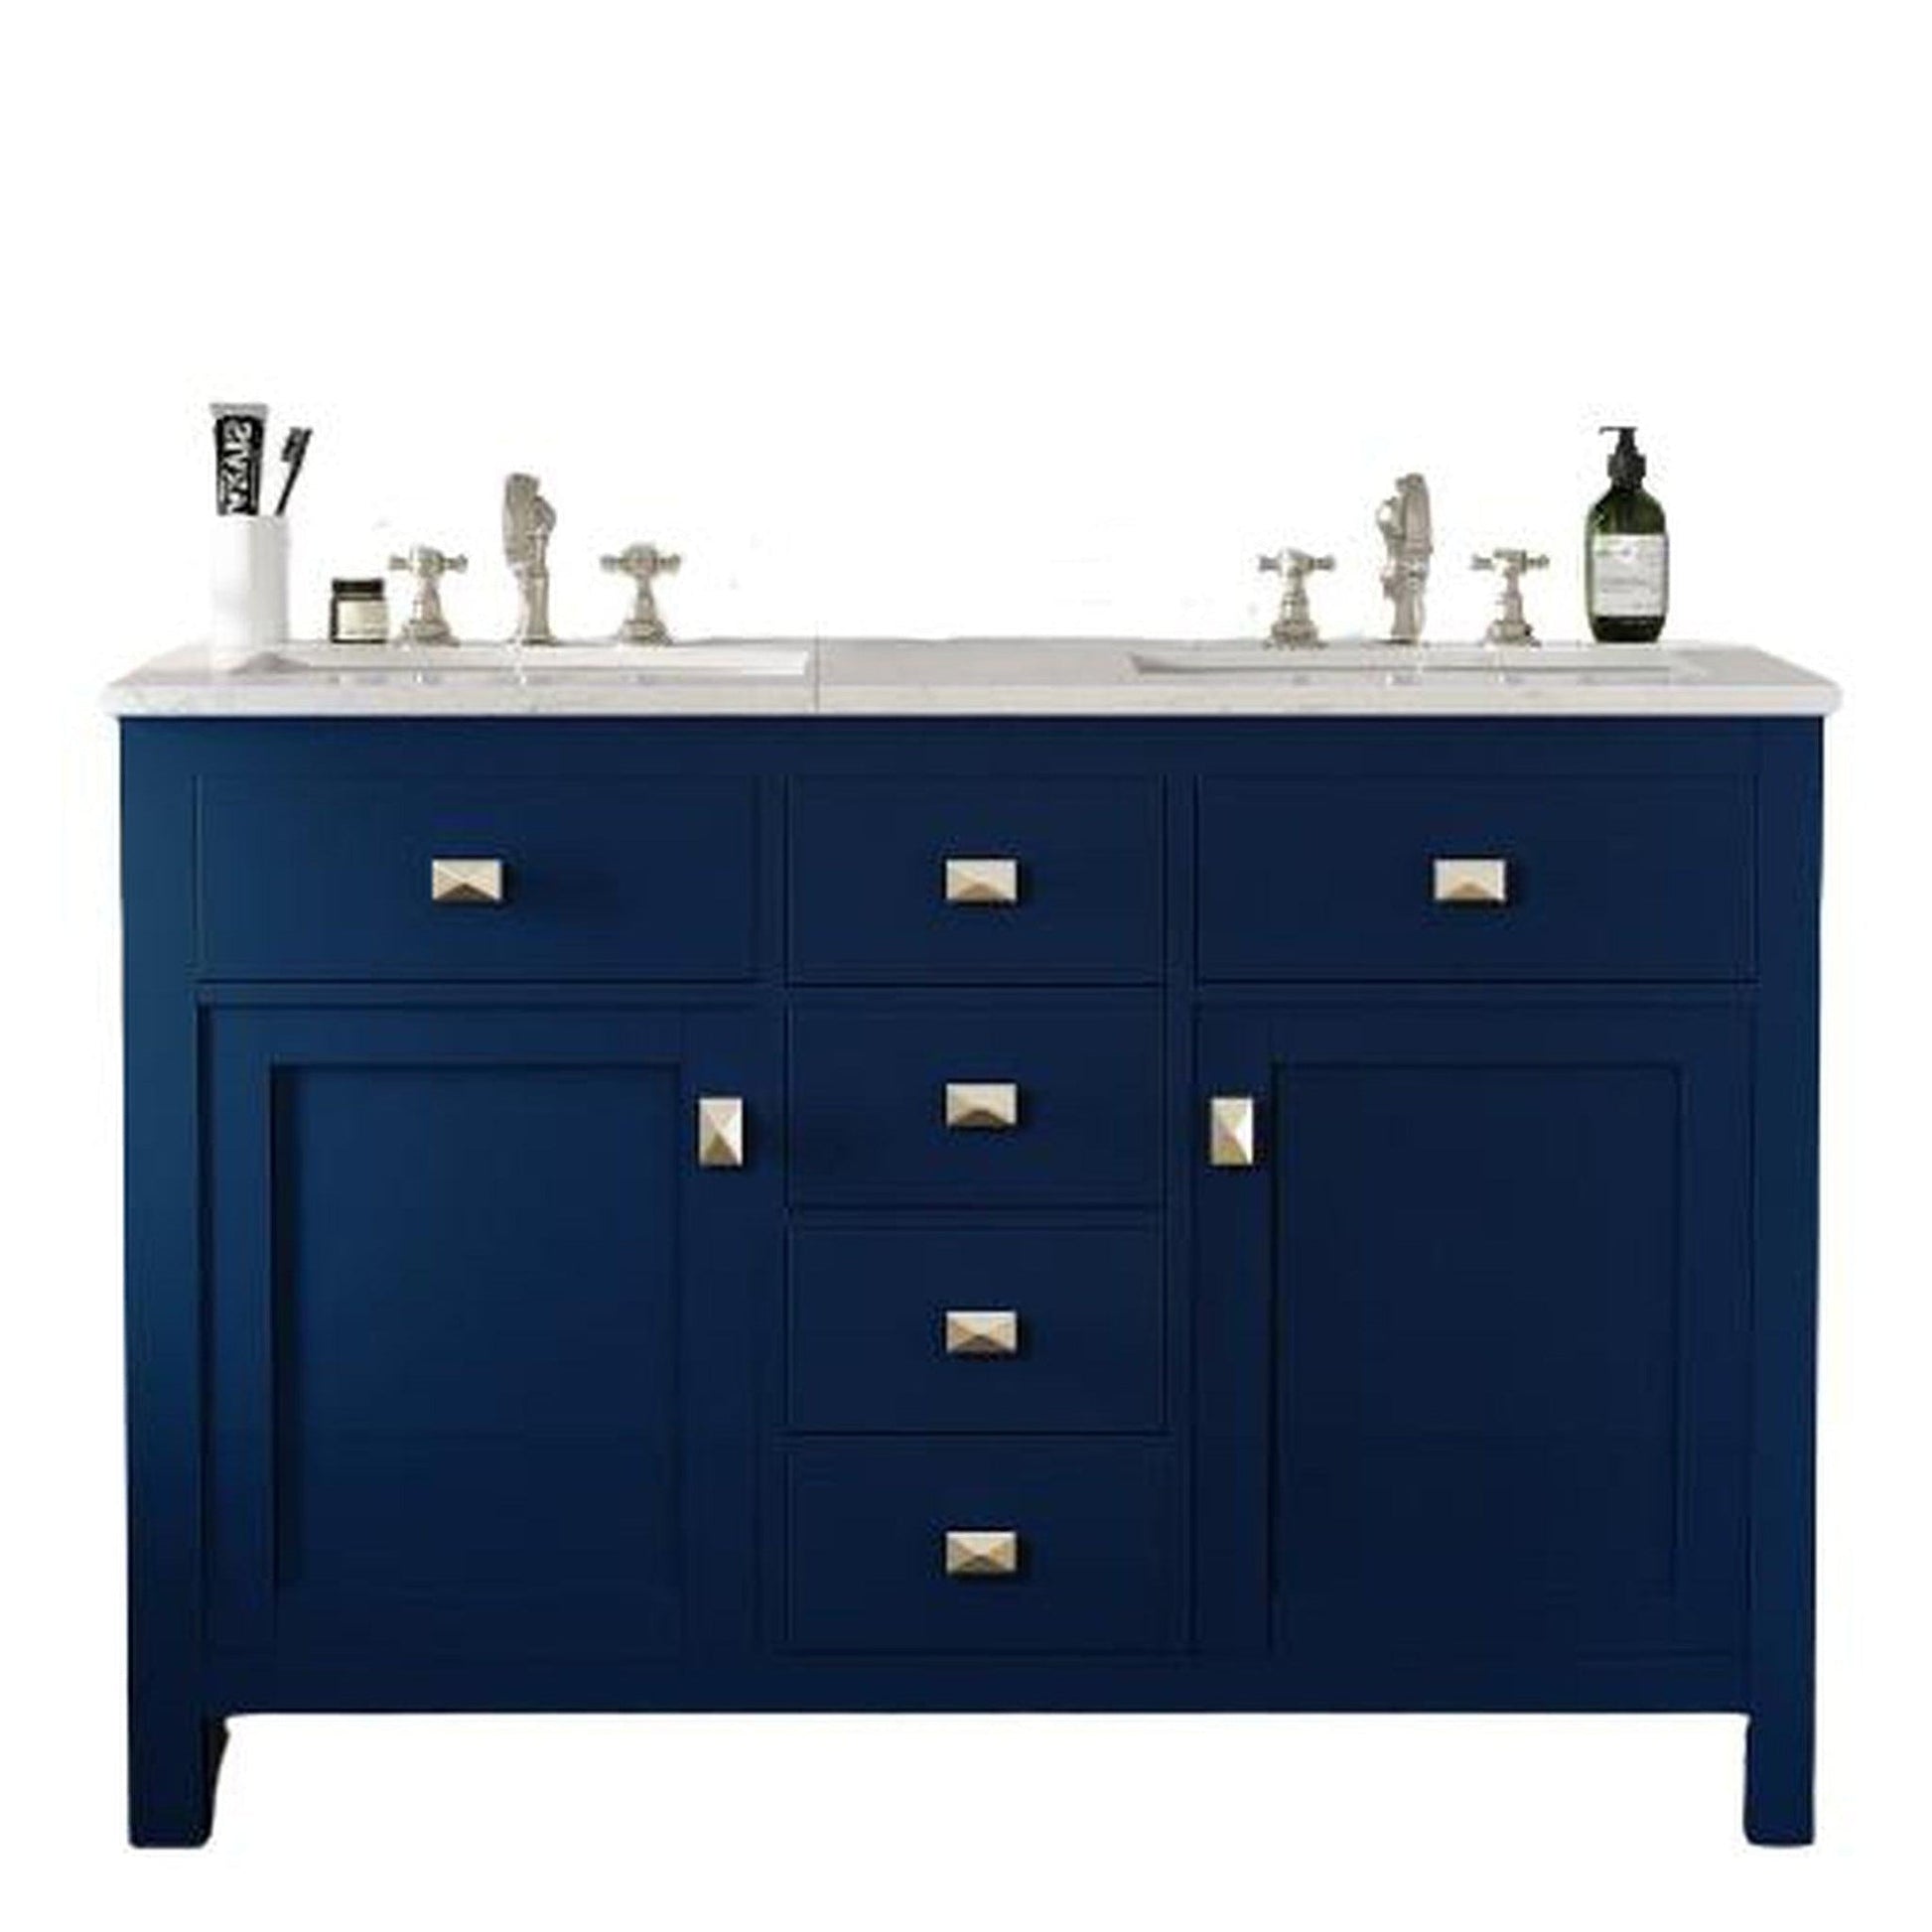 Eviva Totti Artemis 44" x 34" Blue Freestanding Bathroom Vanity With Carrara Style Man-made Stone Countertop and Double Undermount Sink